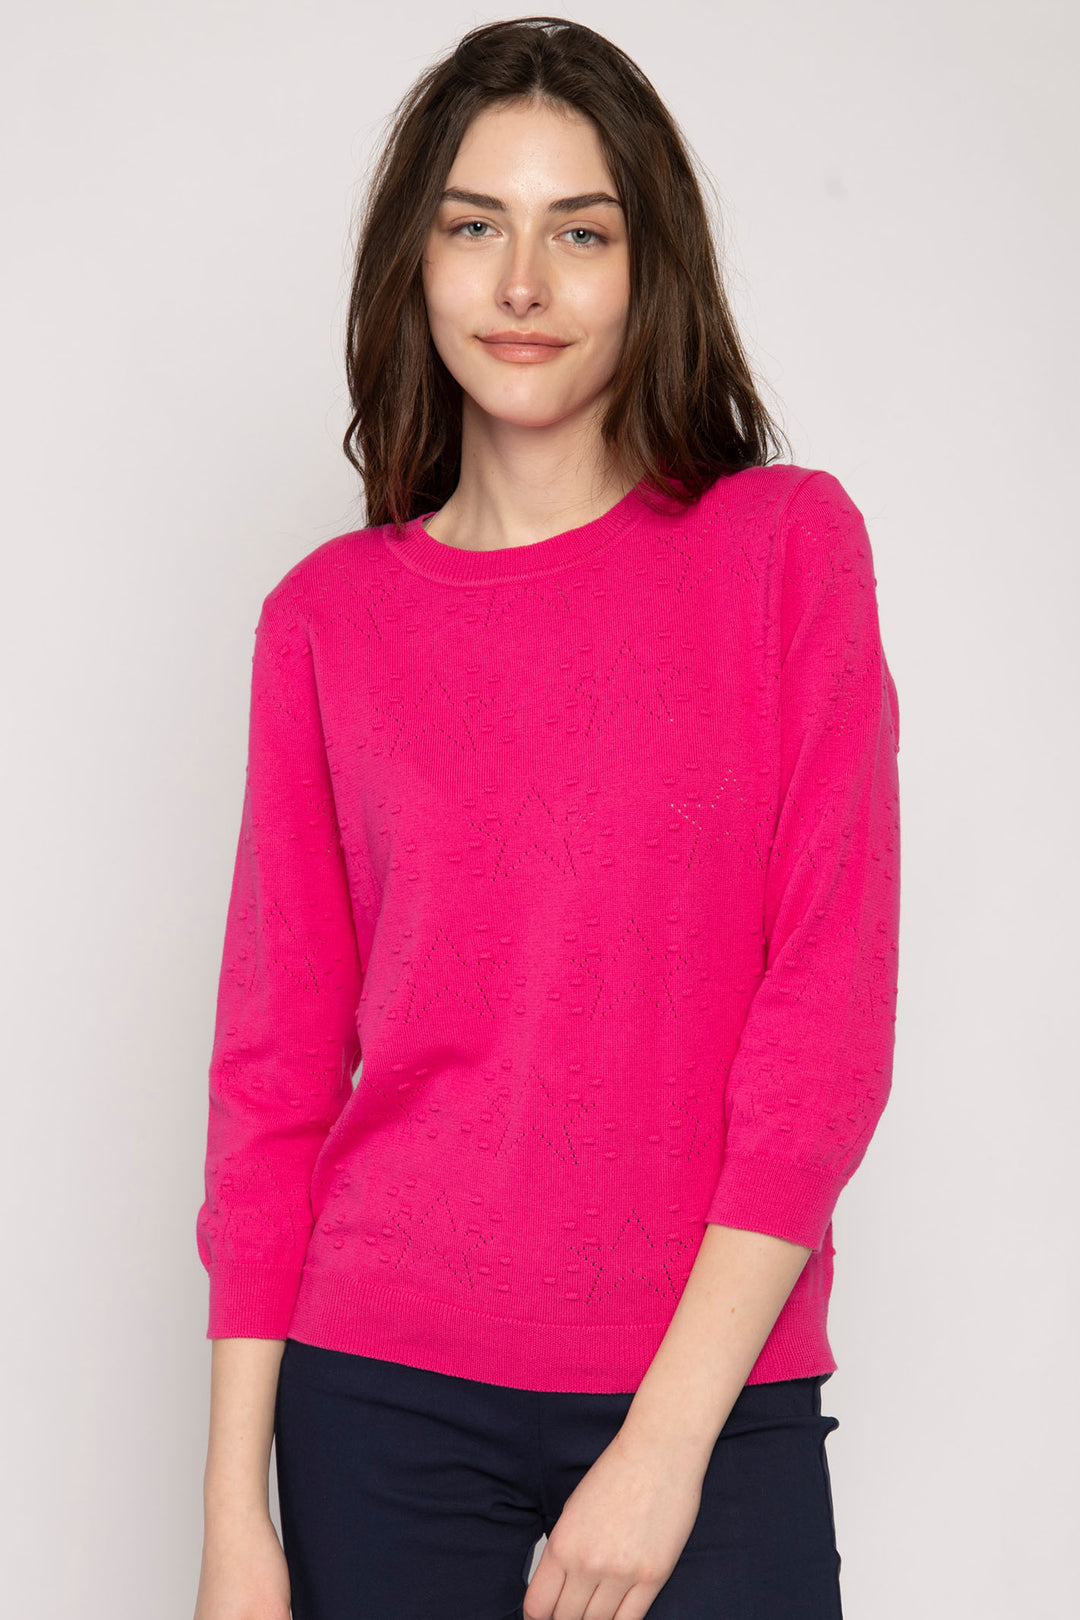 Jessica Graaf 27267 Hot Pink Star Pattern Jumper - Experience Boutique